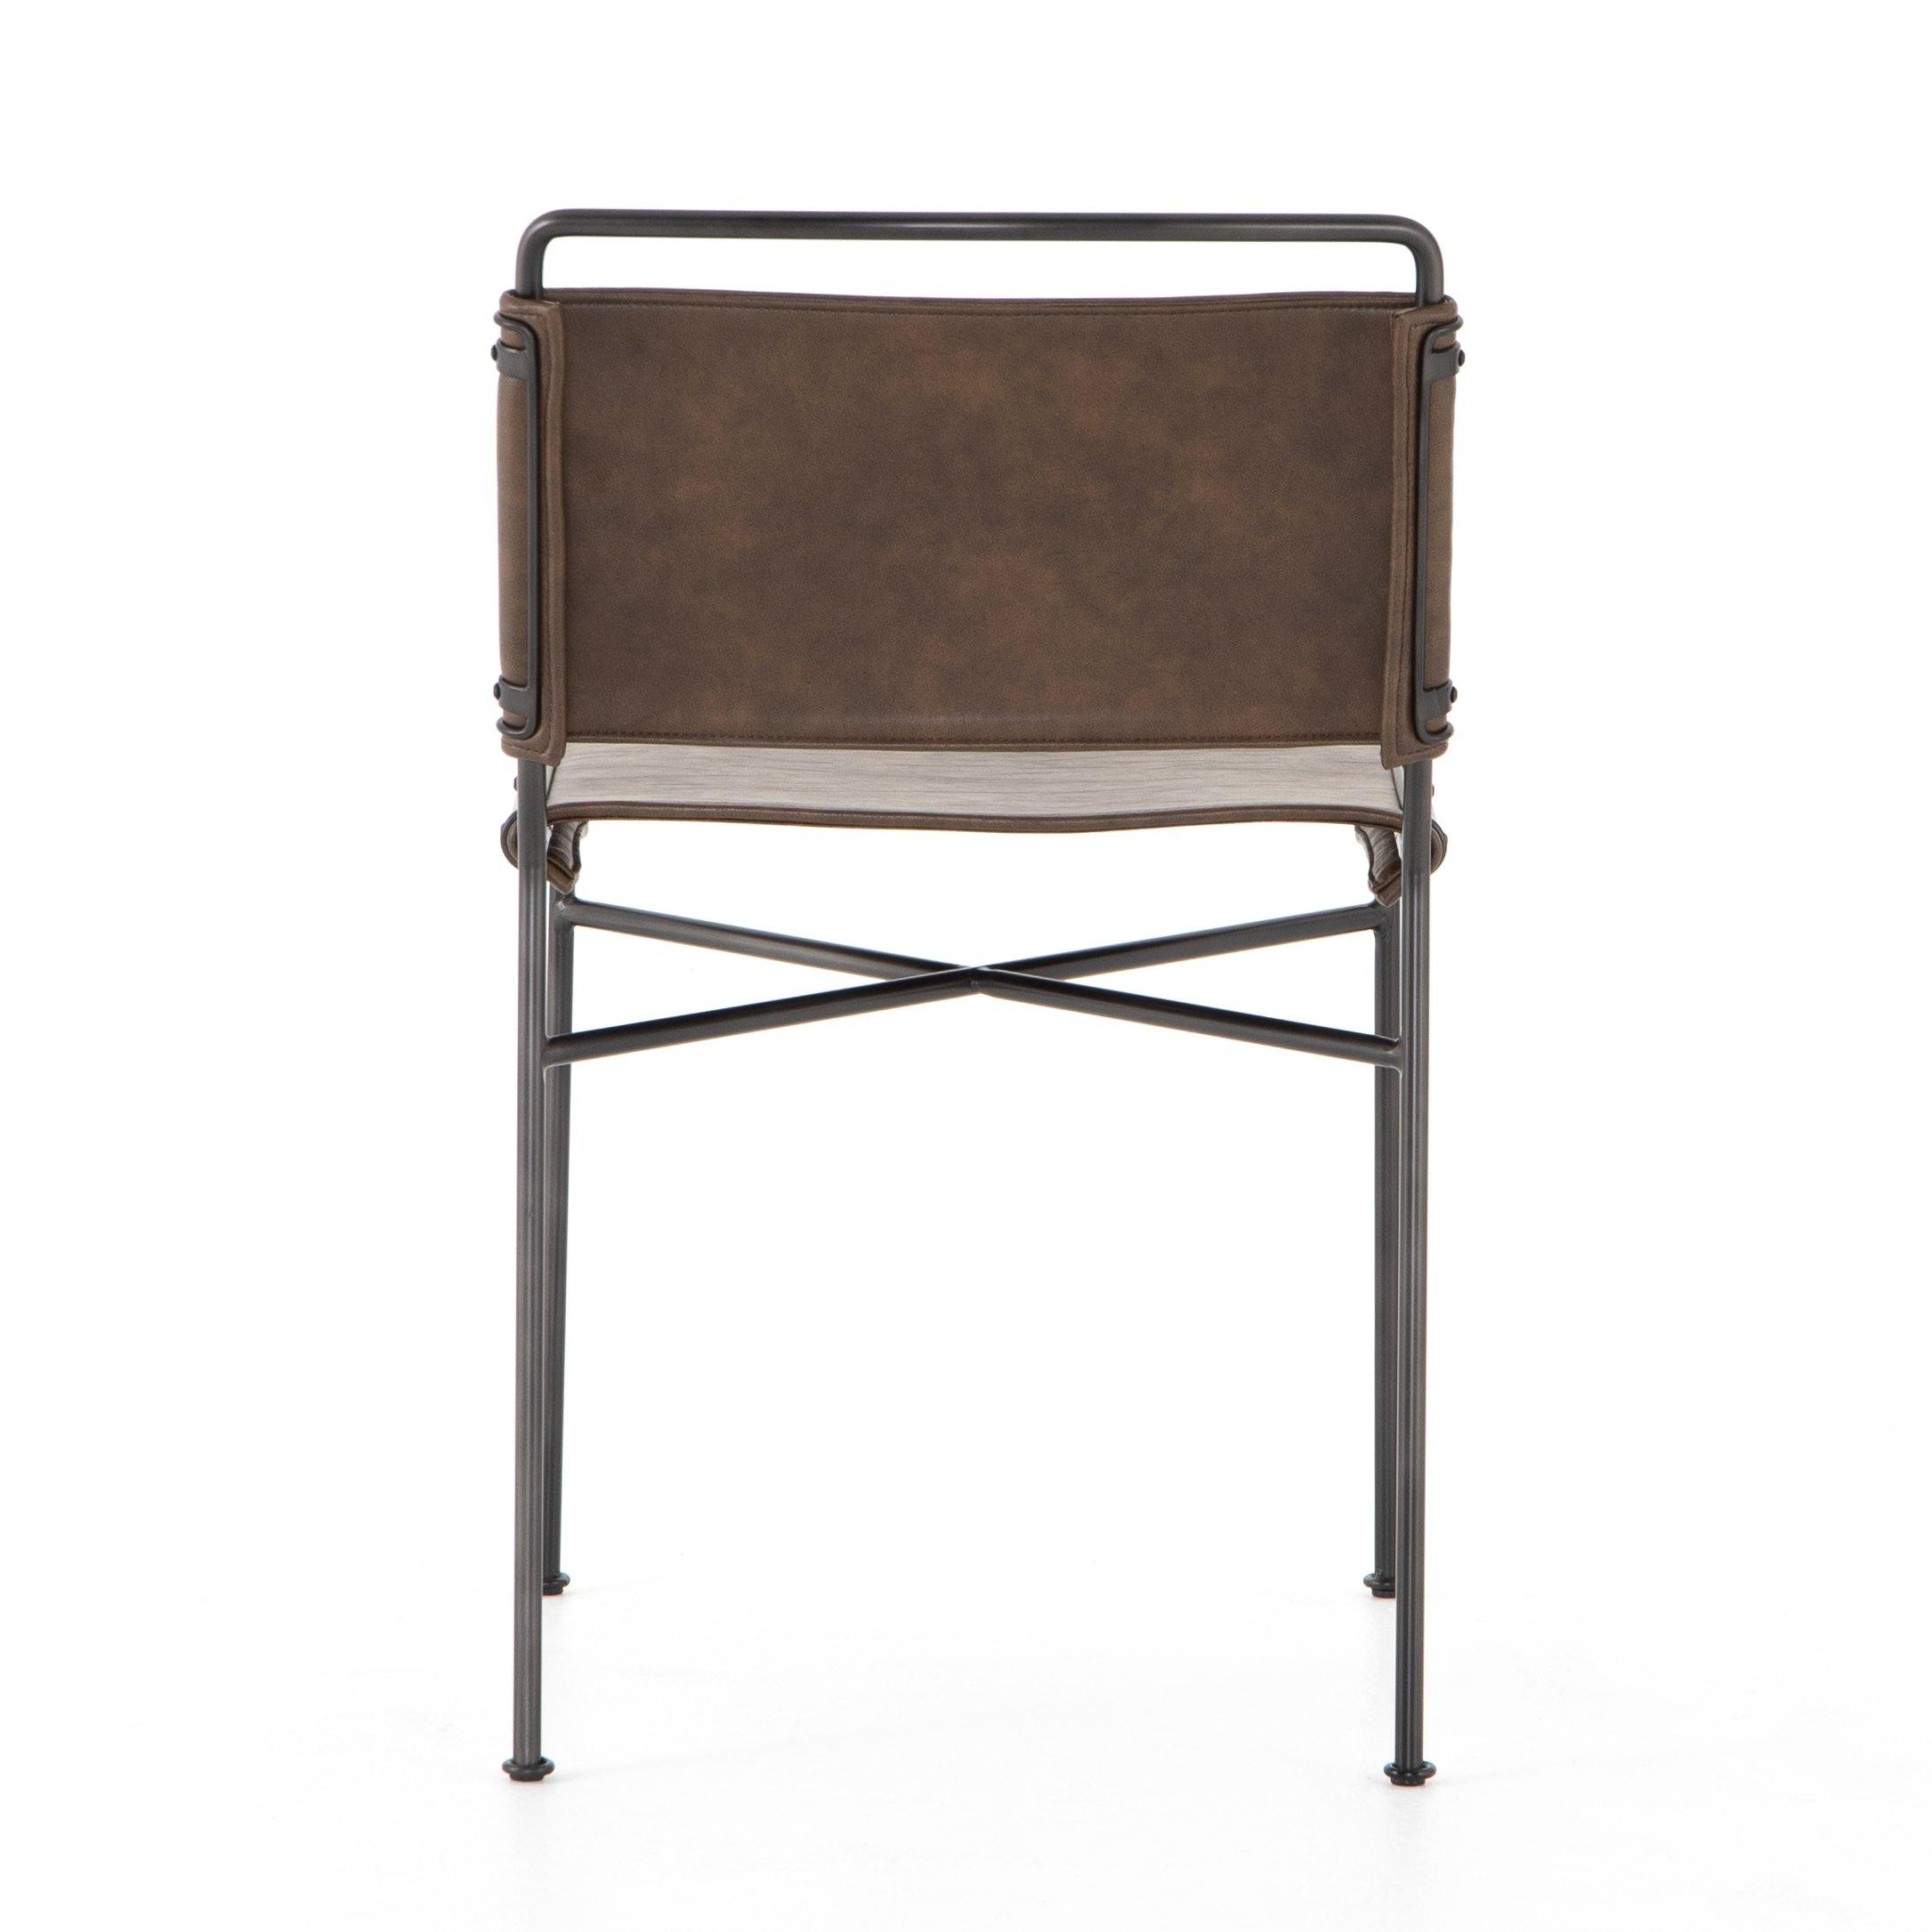 Wharton Dining Chair- Distressed Brown - Reimagine Designs - Dining Chair, new